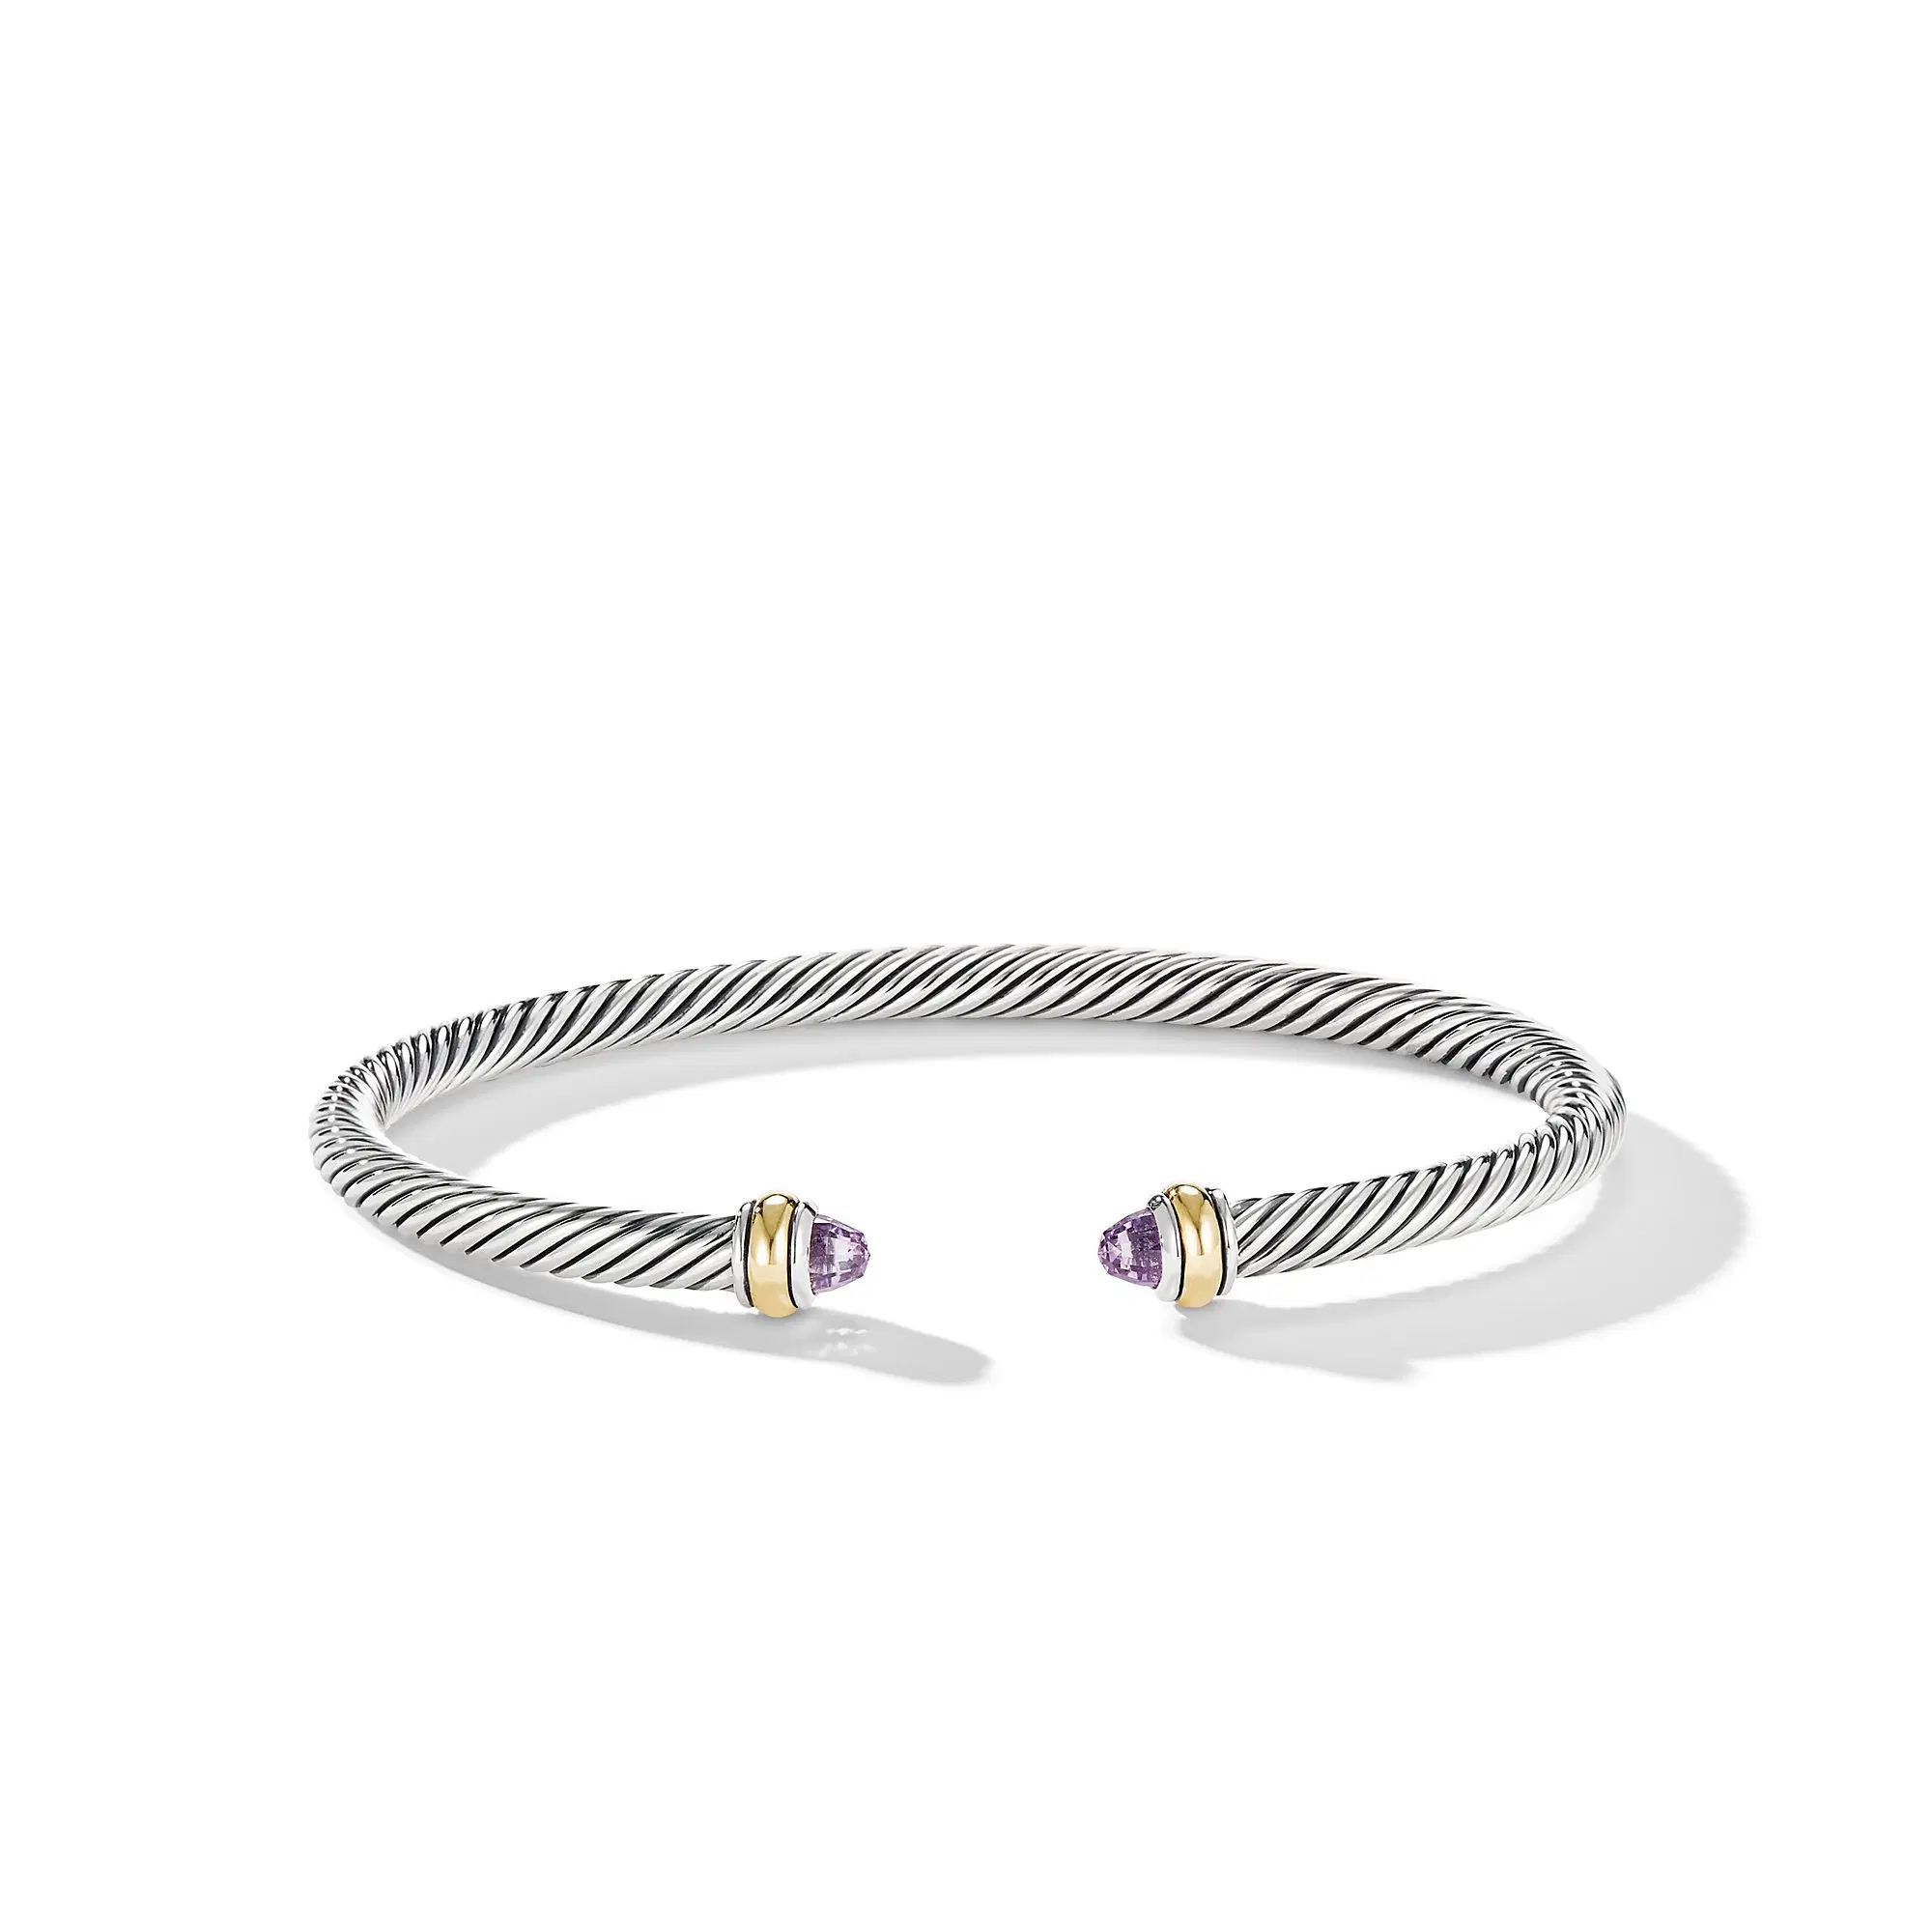 David Yurman 4mm Classic Cable Bracelet in Sterling Silver with Gold and Amethyst